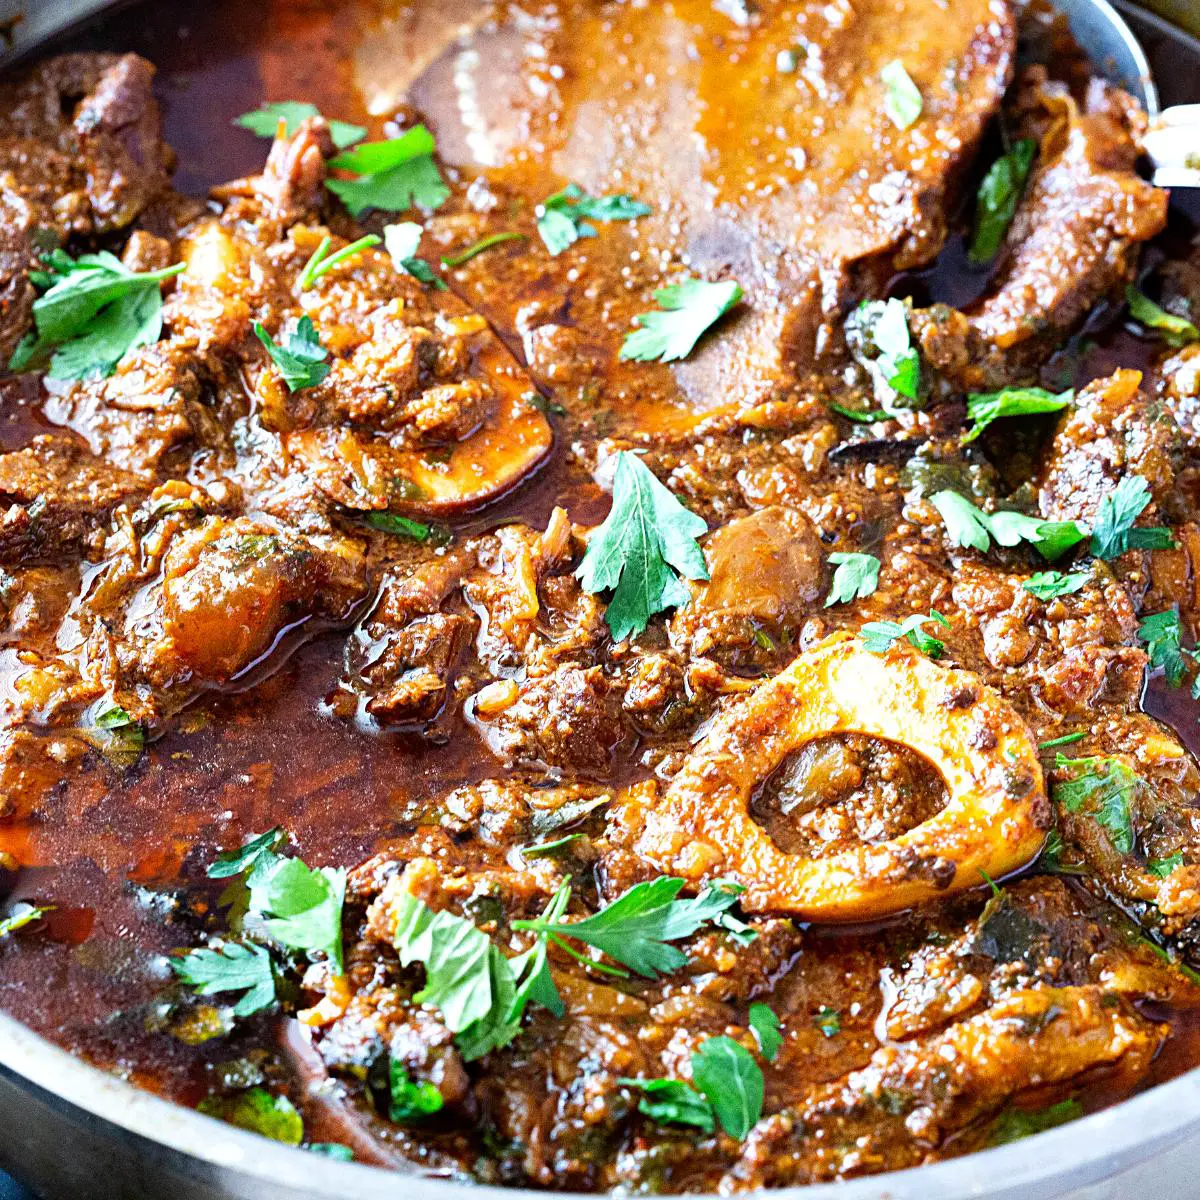 A stew with beef shanks in nihari curry.